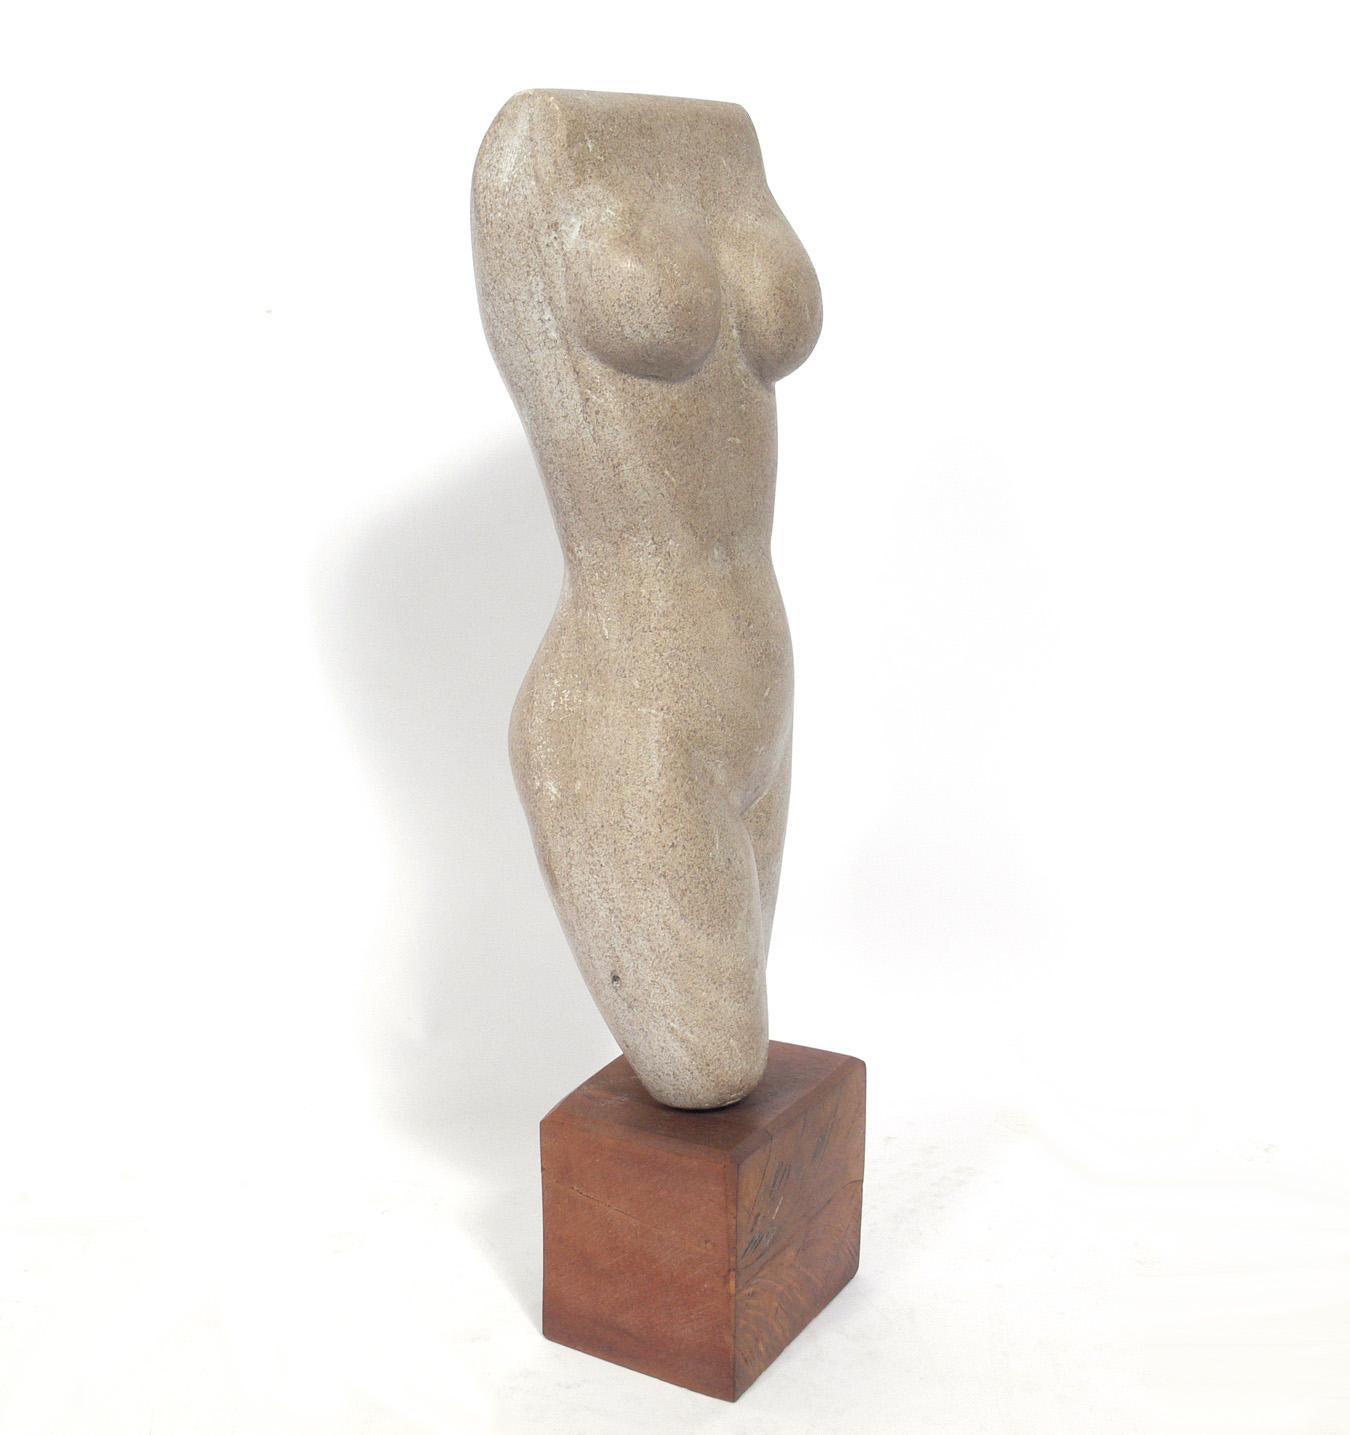 Female nude stone sculpture, believed to be at least circa 1950s, possibly much earlier. This piece came to us from the estate of an NYC collector that had a wide range of art and objects from different eras, from Pre-Columbian to ultra